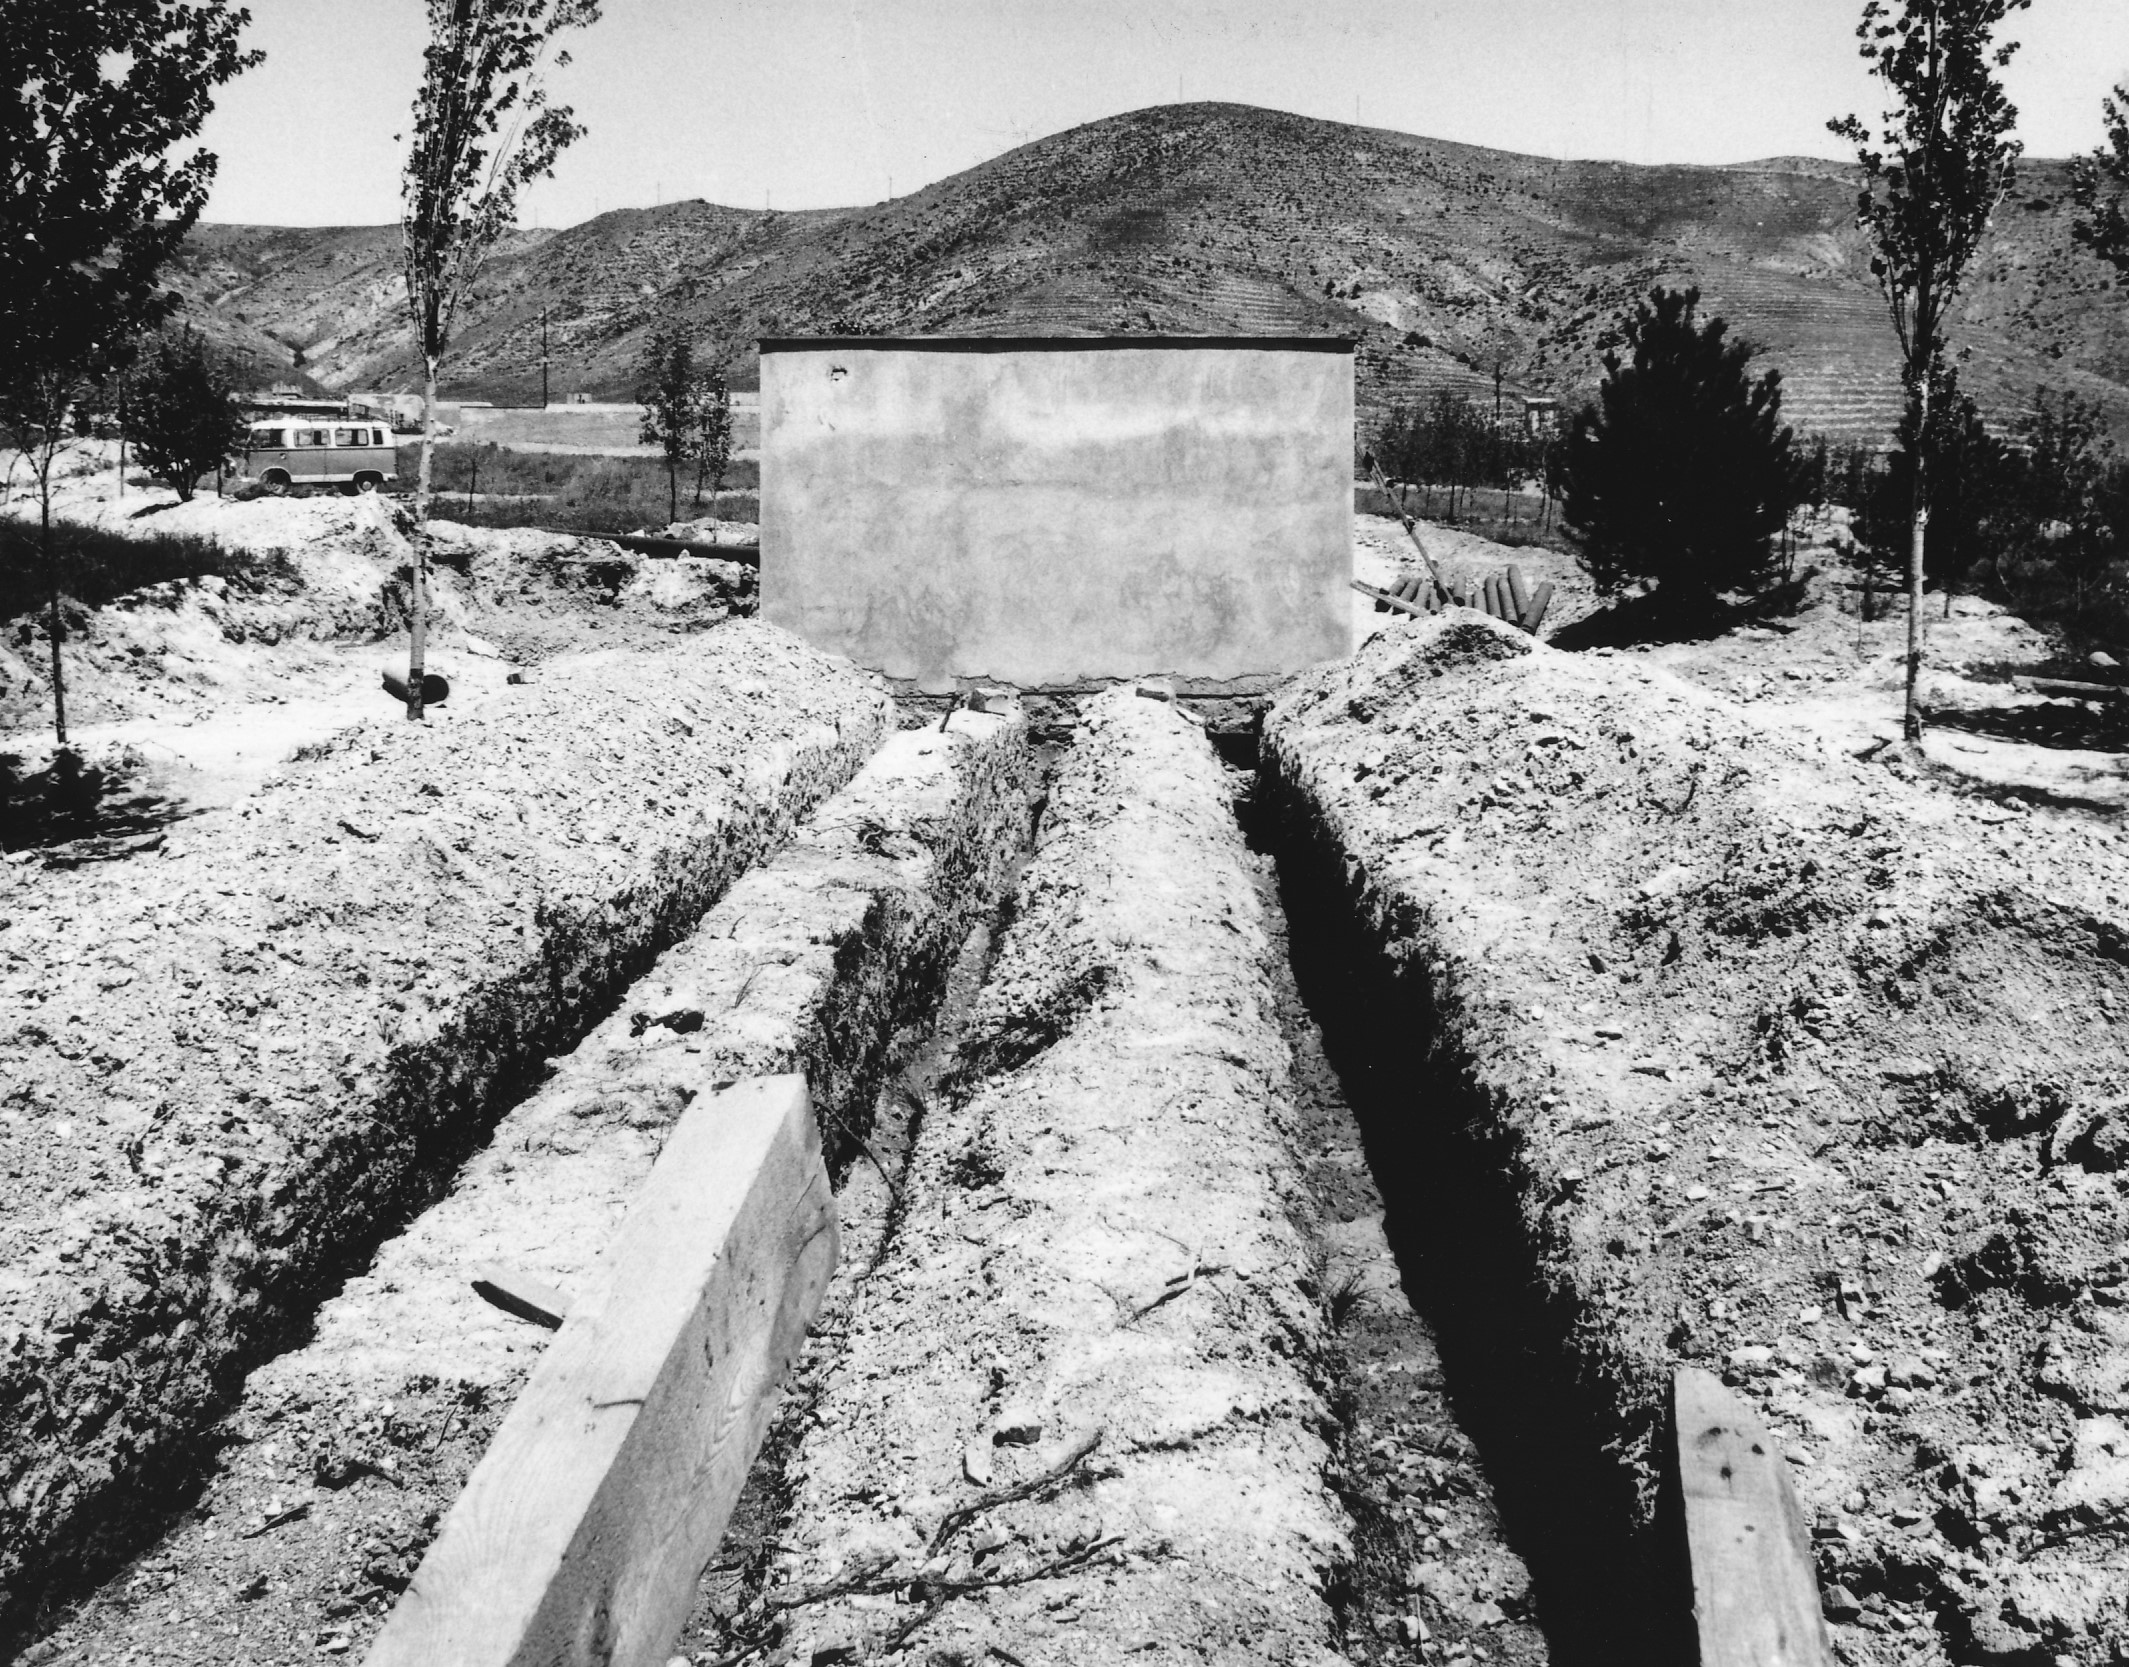 Lake Eymir water supply project (1970s)